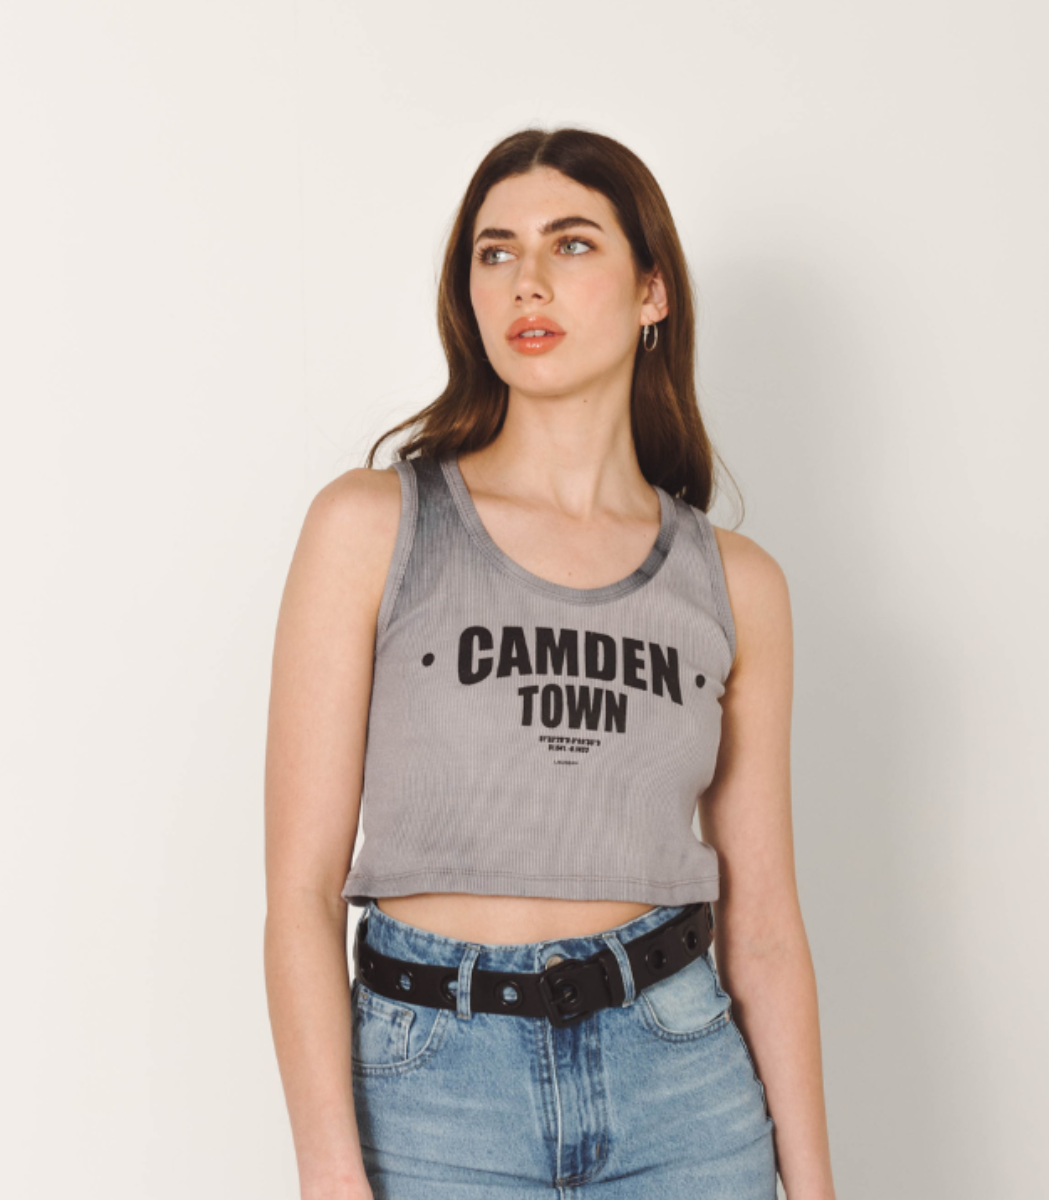 MUSCULOSA MOLLER PROCESS TOWN 